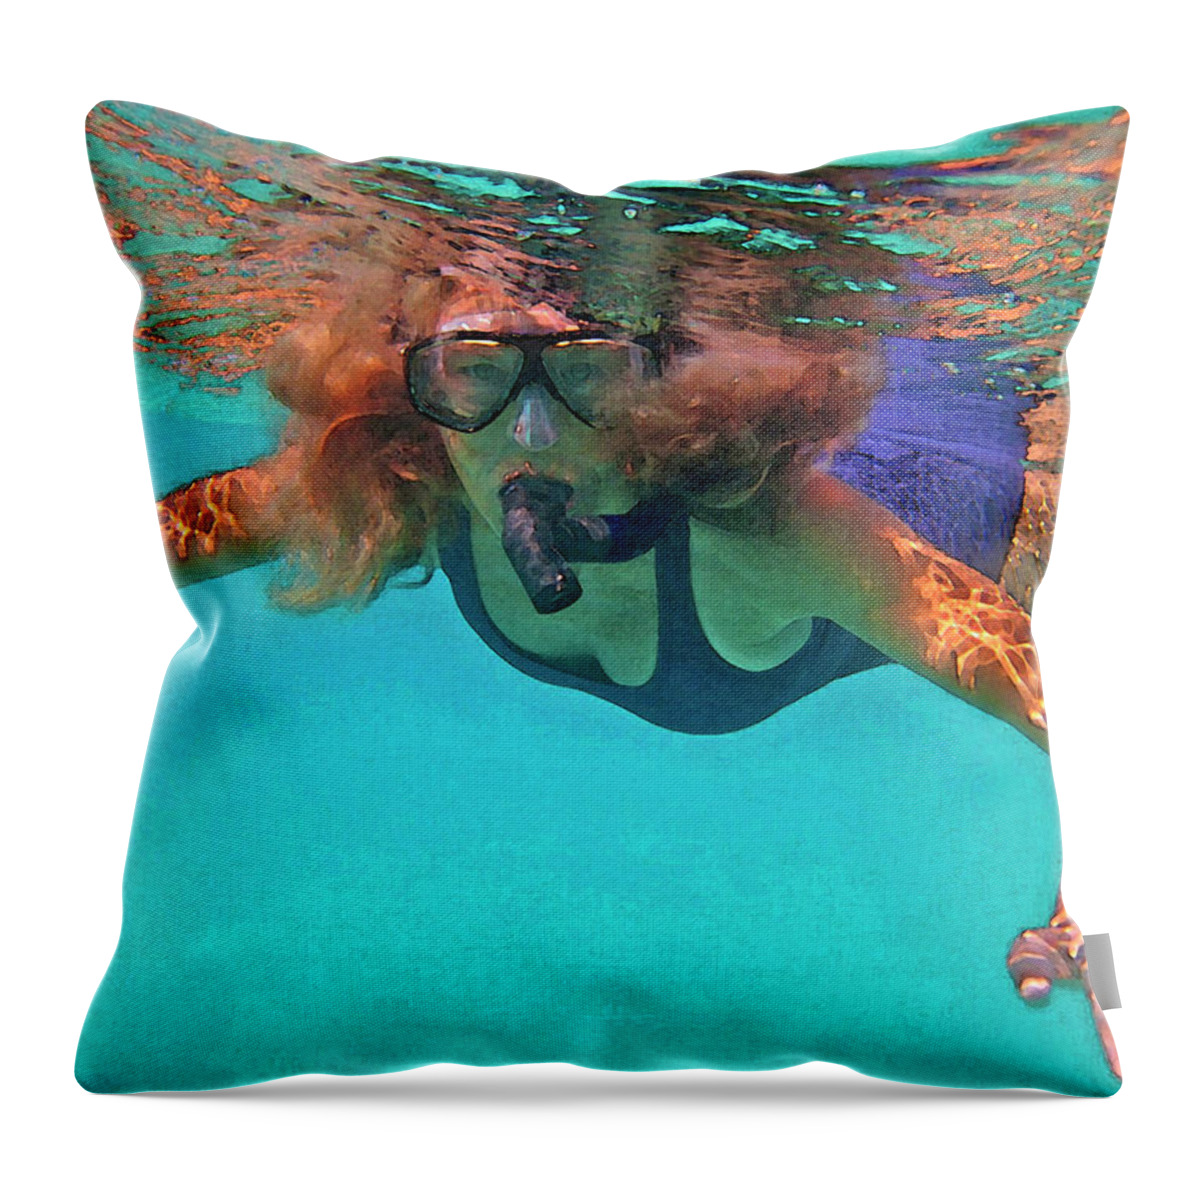 Woman Snorkeling Throw Pillow featuring the photograph The Snorkeler by Bette Phelan